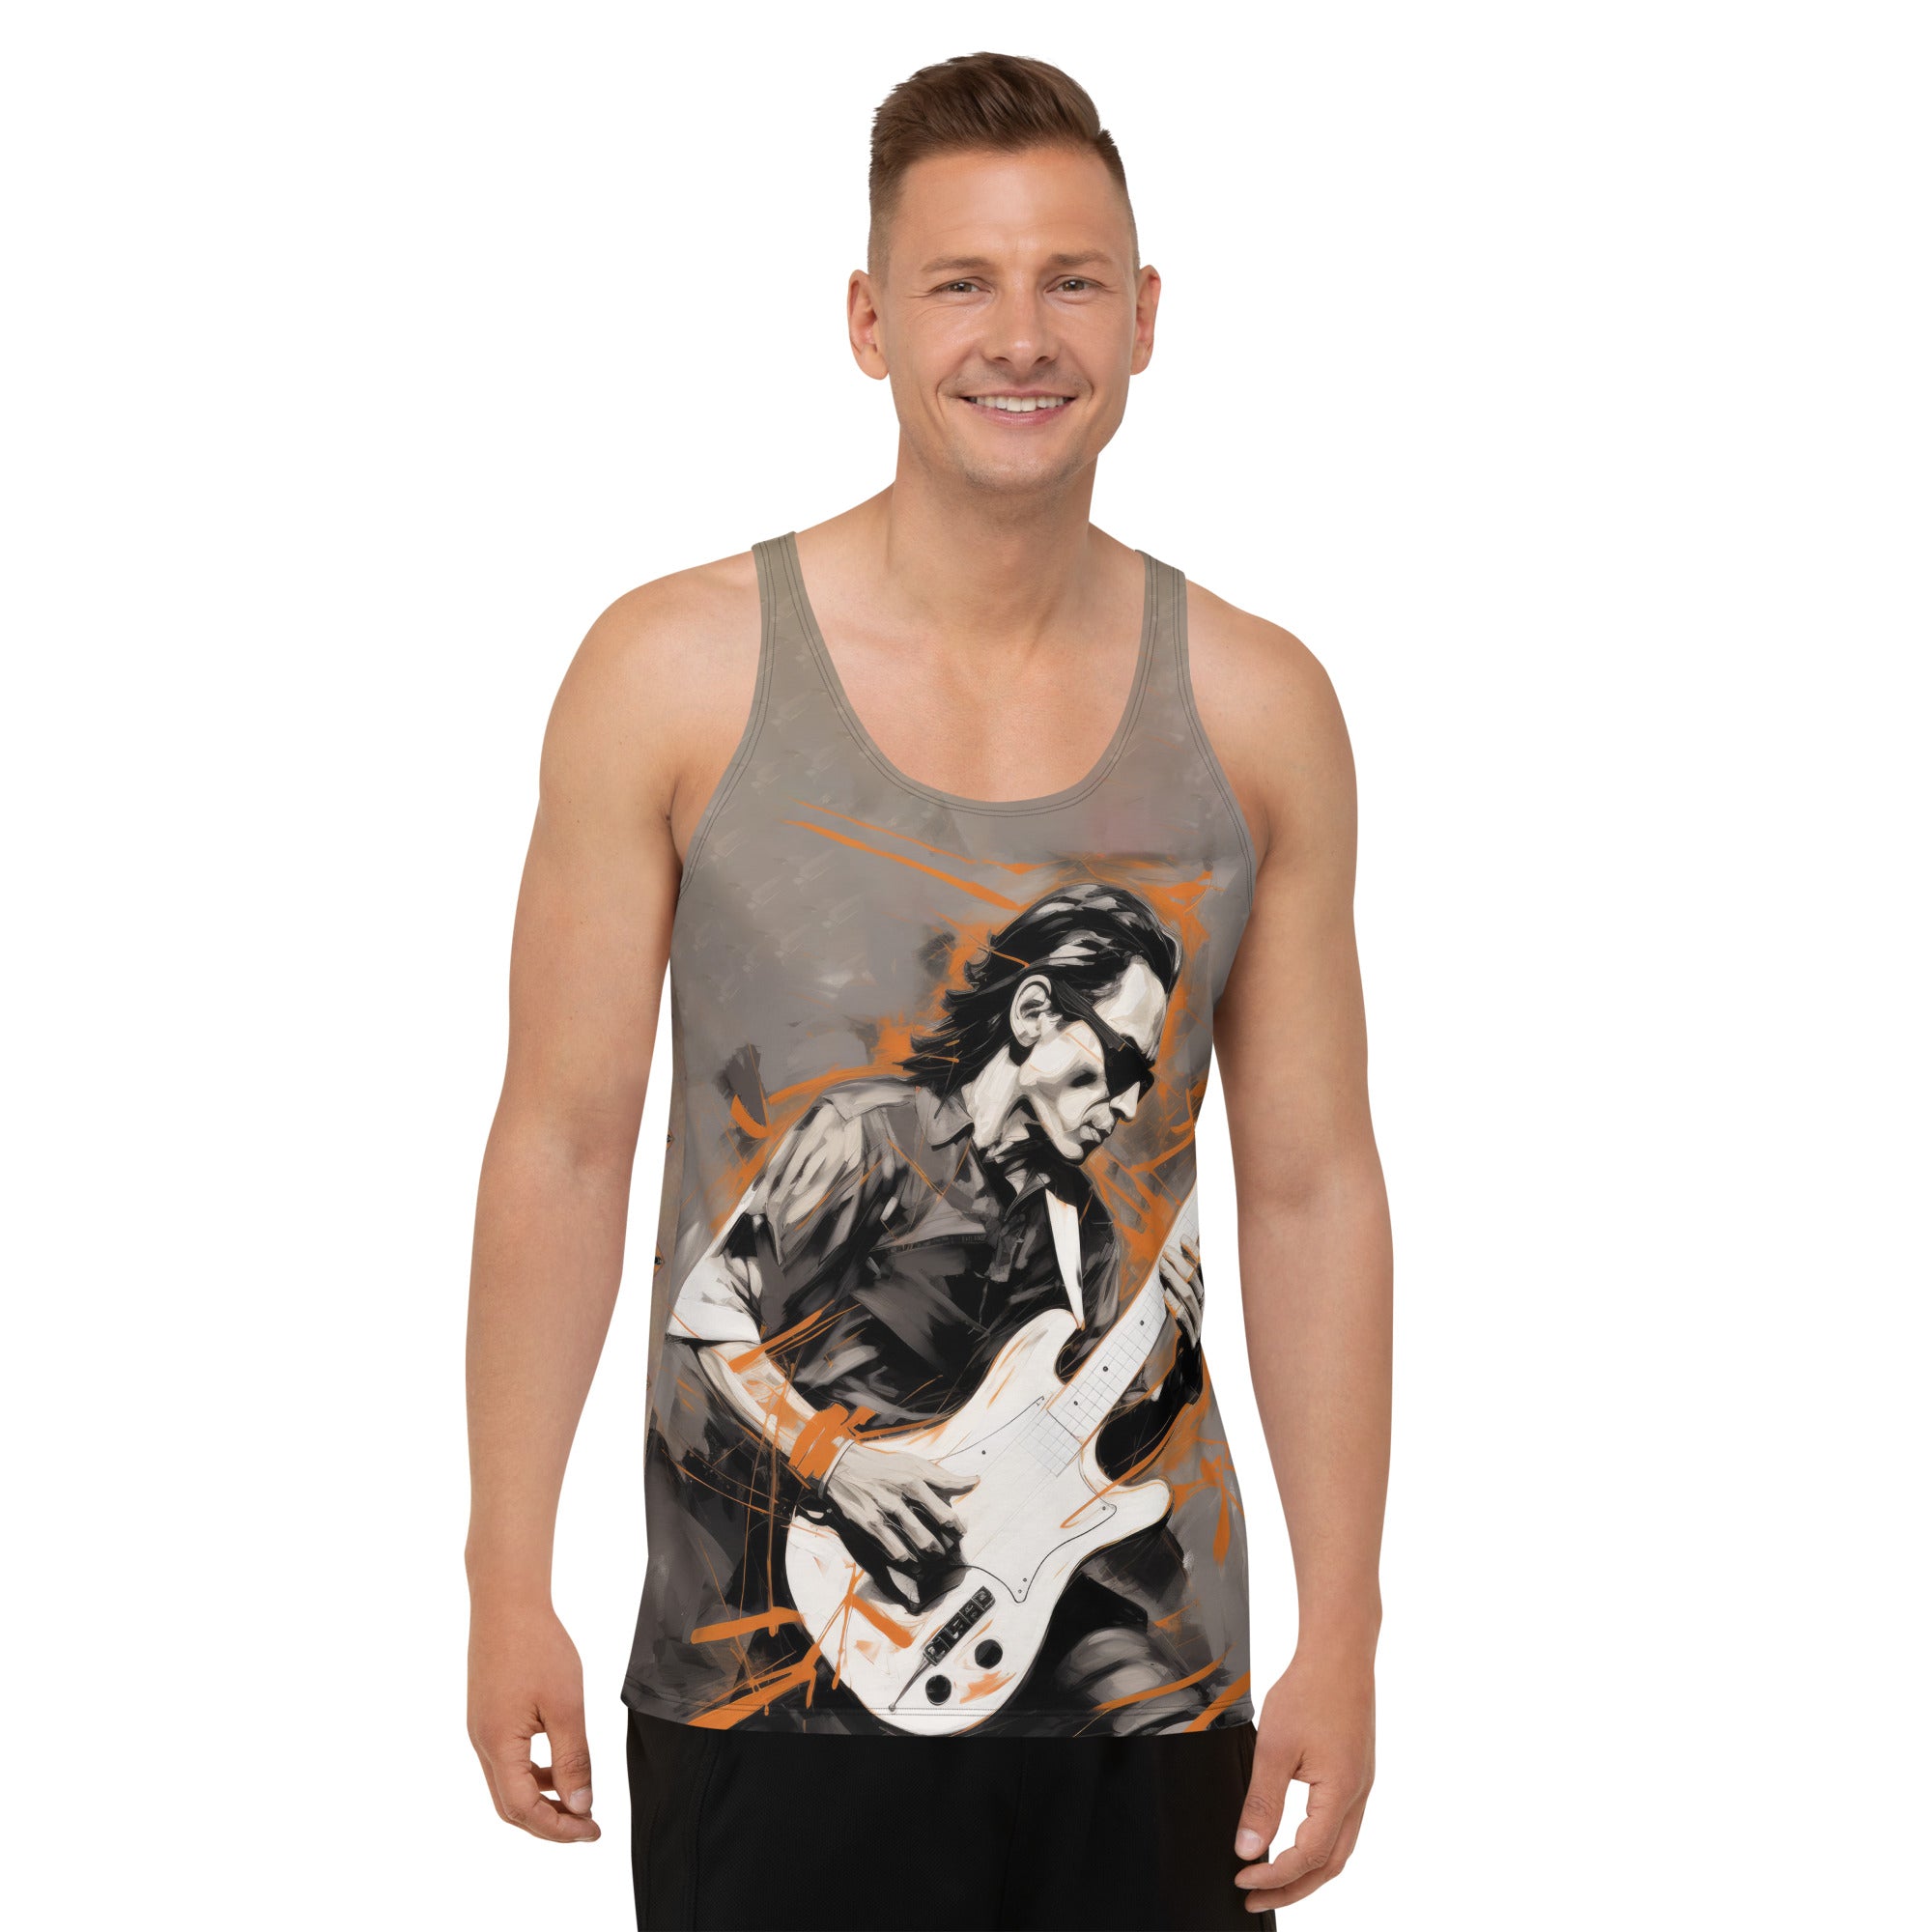 Stylish Silver Lining tank top for men, perfect for summer.